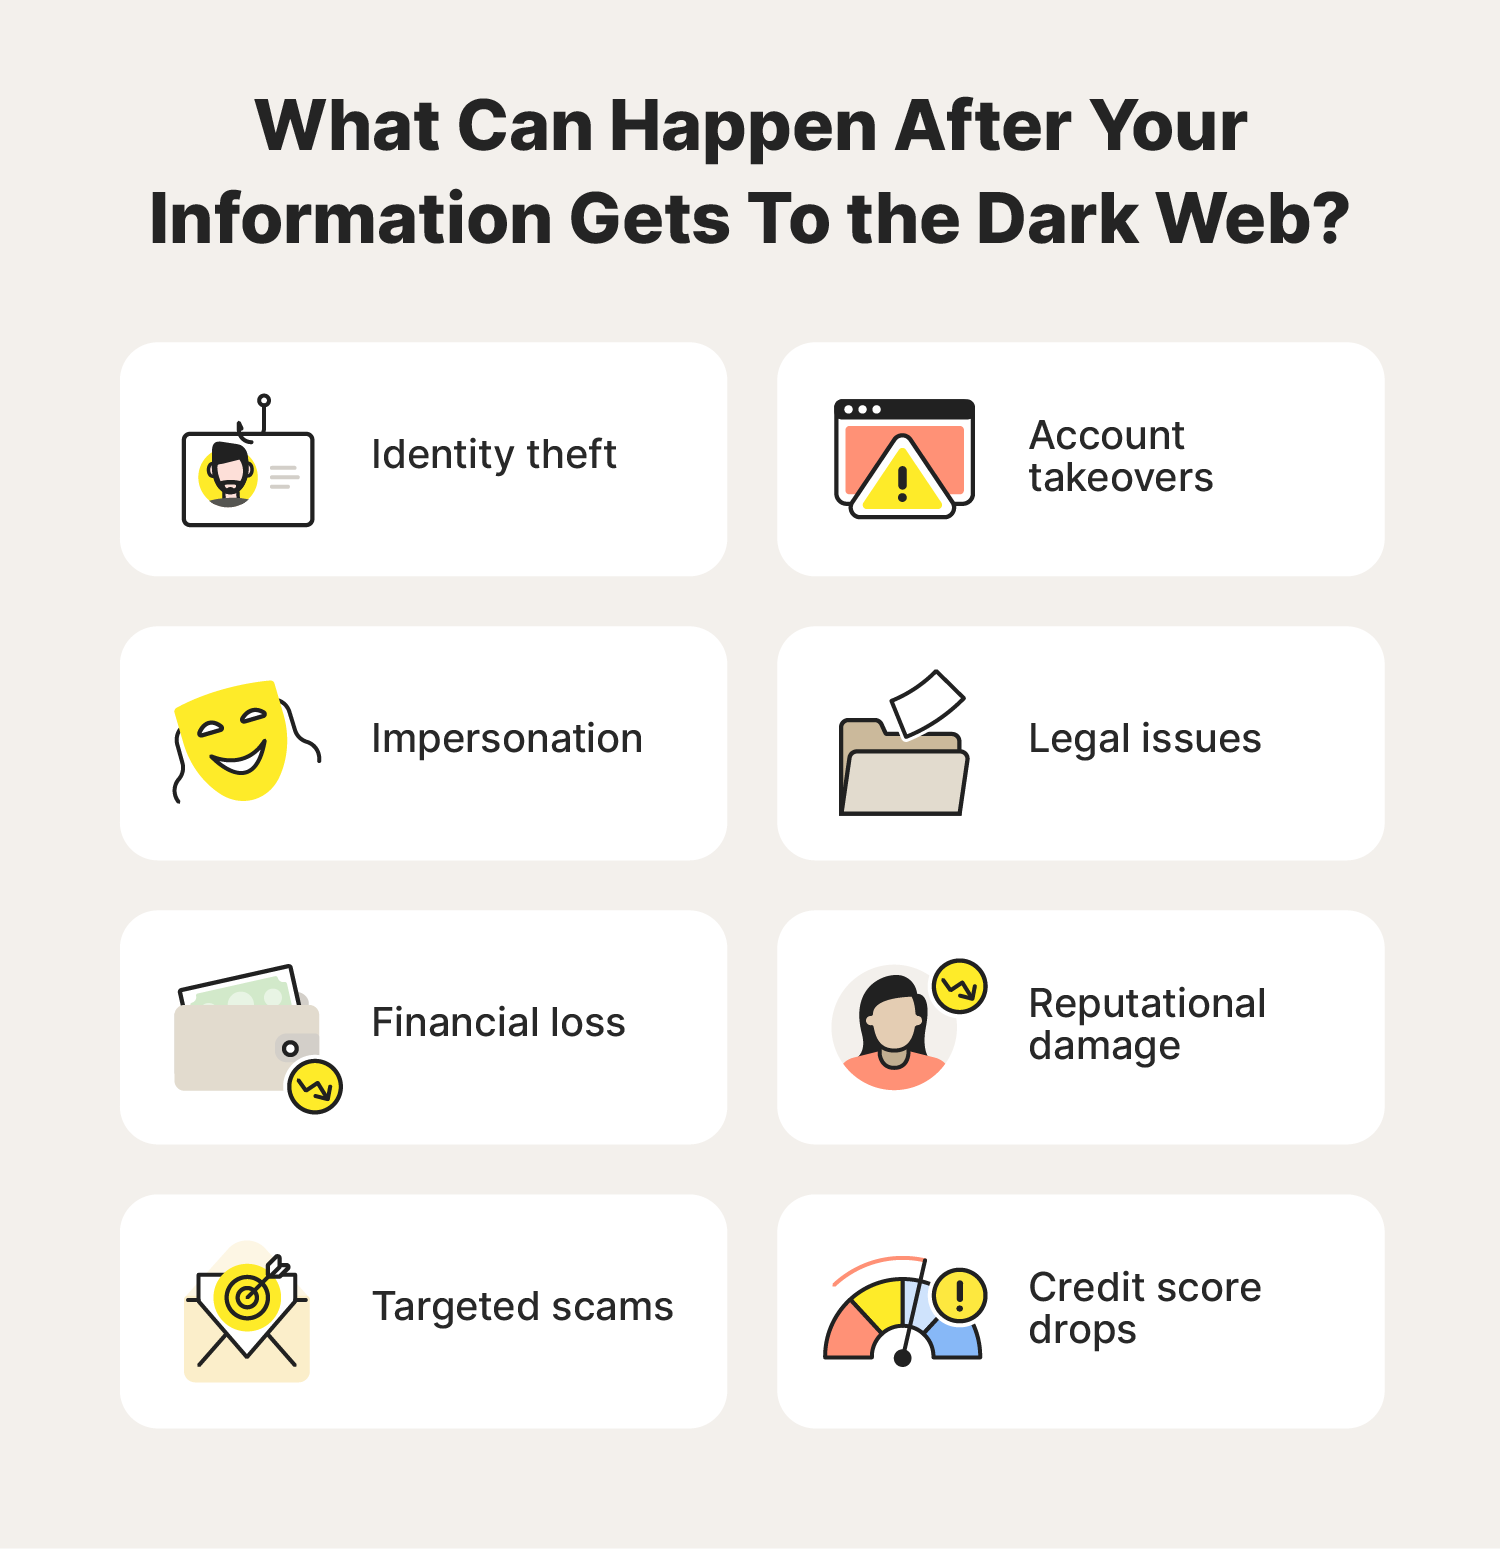 A list of things that can happen if your personal information is leaked to the dark web.